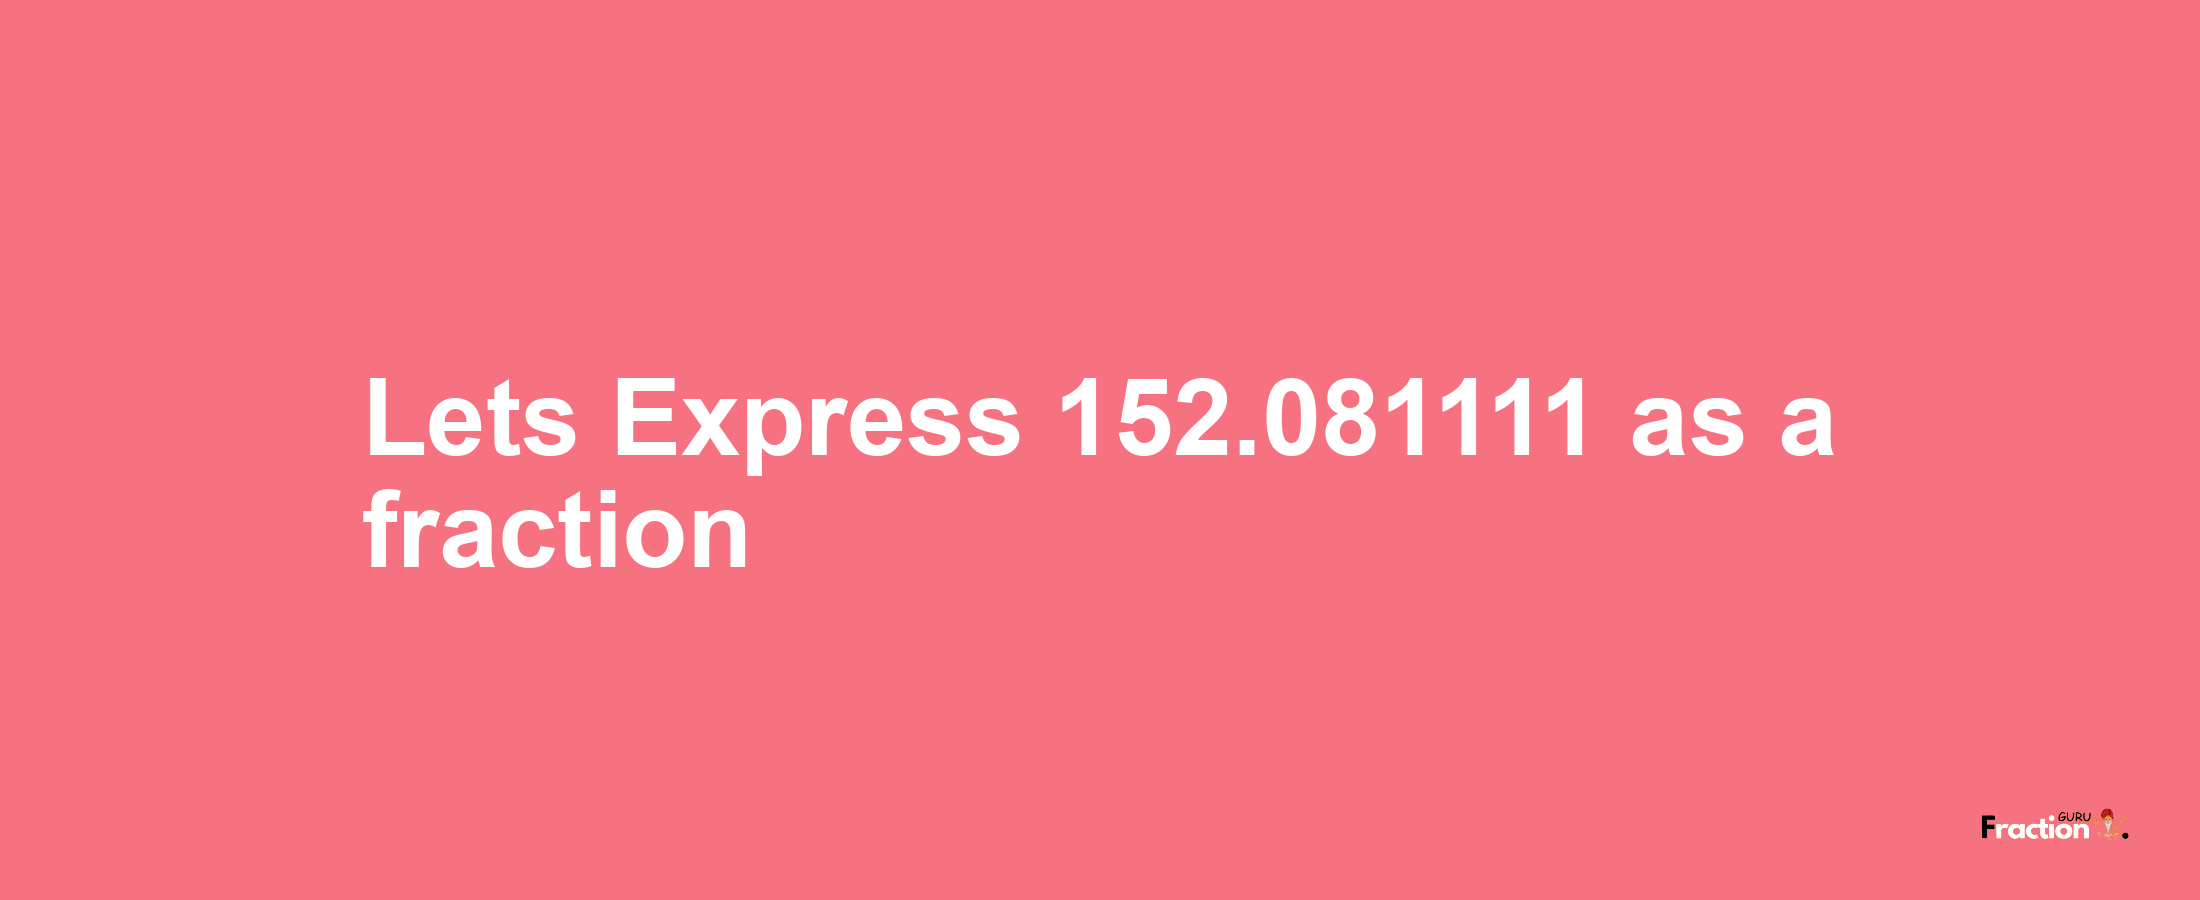 Lets Express 152.081111 as afraction